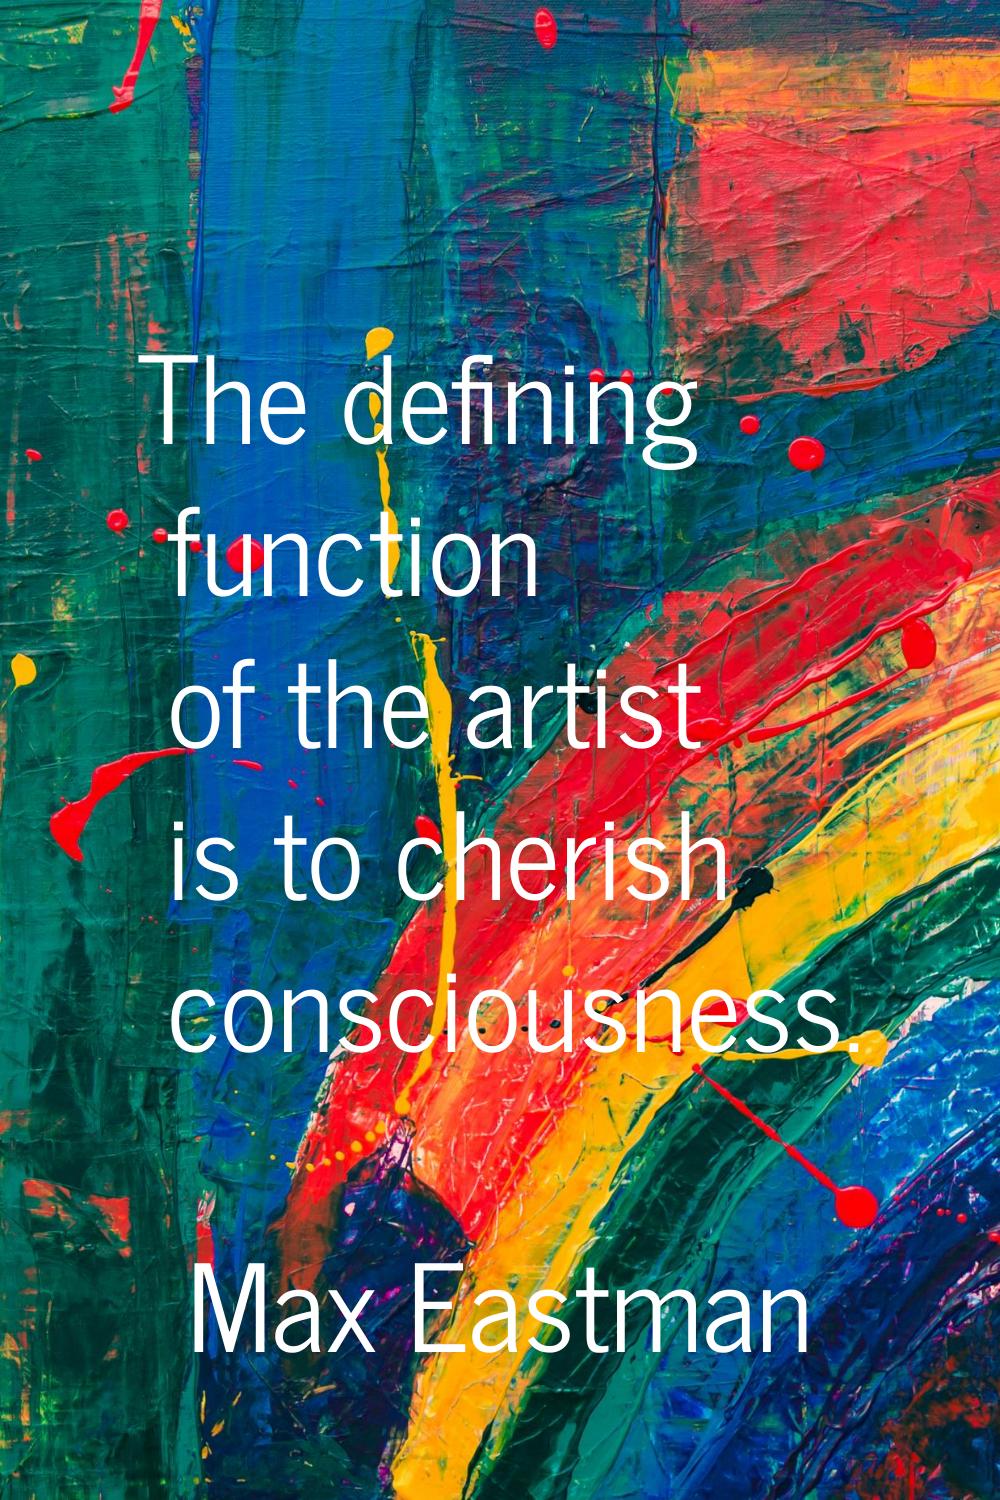 The defining function of the artist is to cherish consciousness.